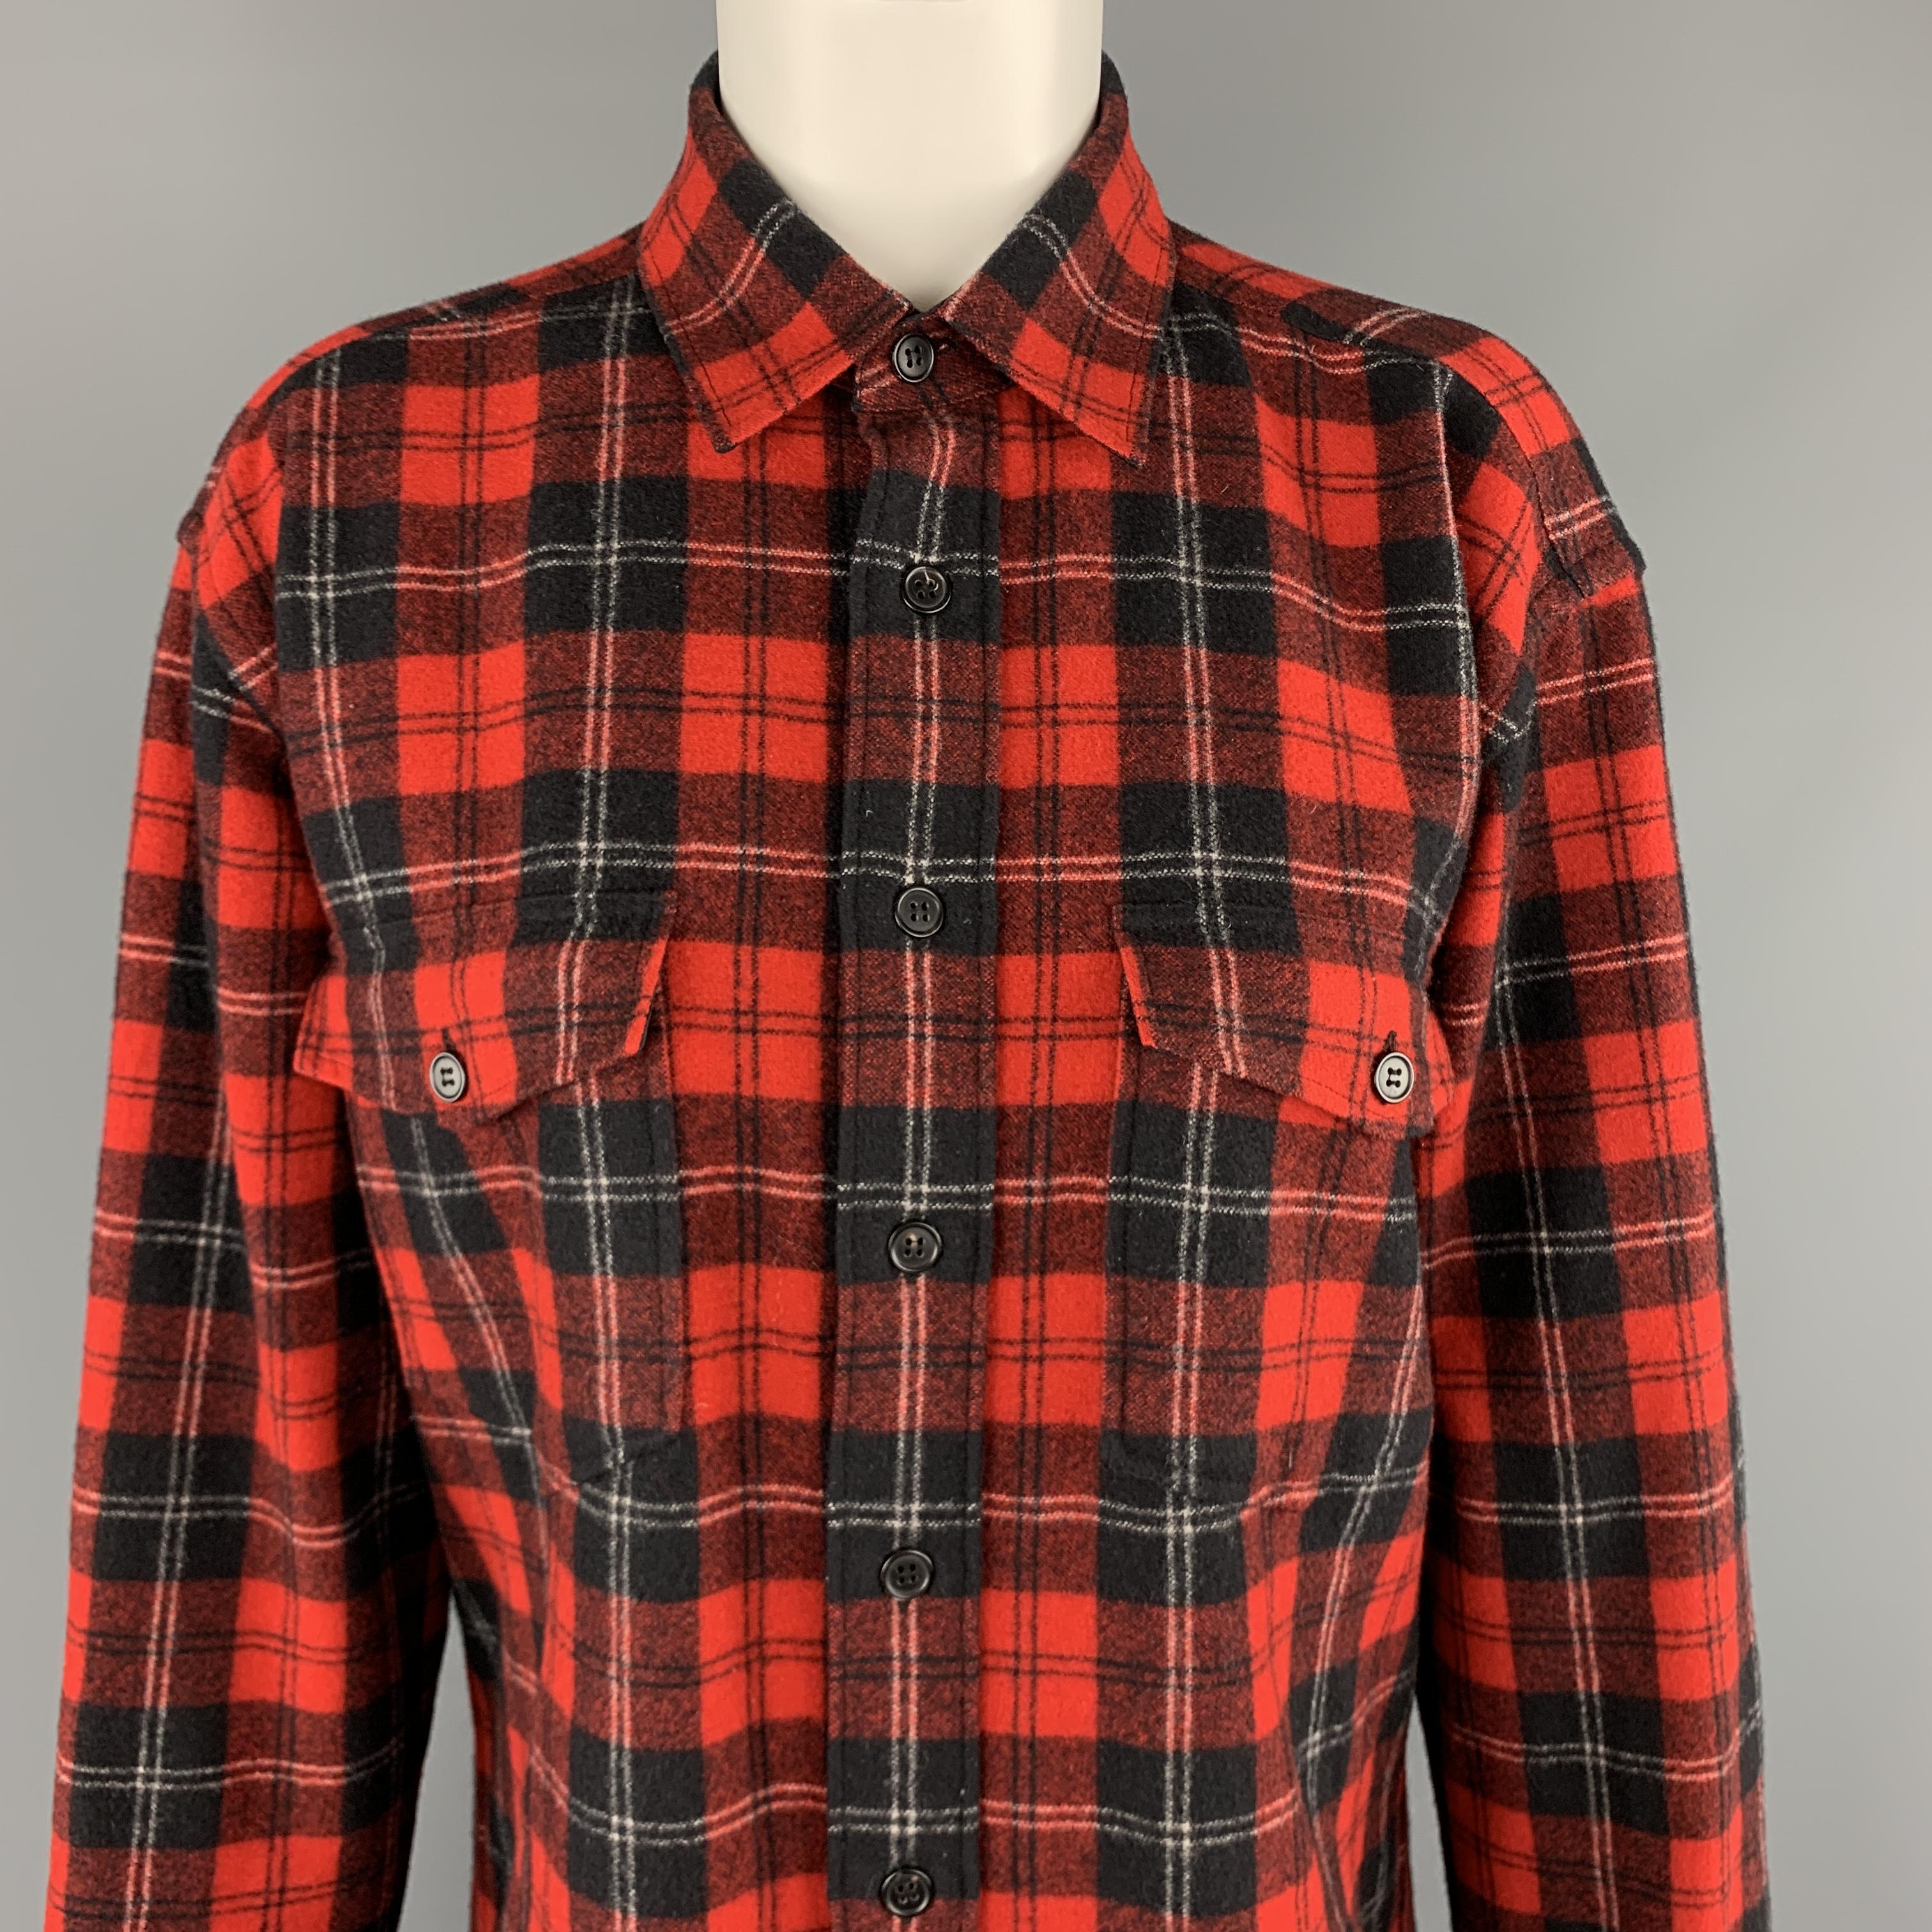 SAINT LAURENT shirt comes in red and black plaid flannel with a pointed collar, oversized fit, and patch flap pockets. Made in Italy.

Excellent Pre-Owned Condition.
Marked: F 36

Measurements:

Shoulder: 18 in.
Bust: 44 in.
Sleeve: 23.5 in.
Length: